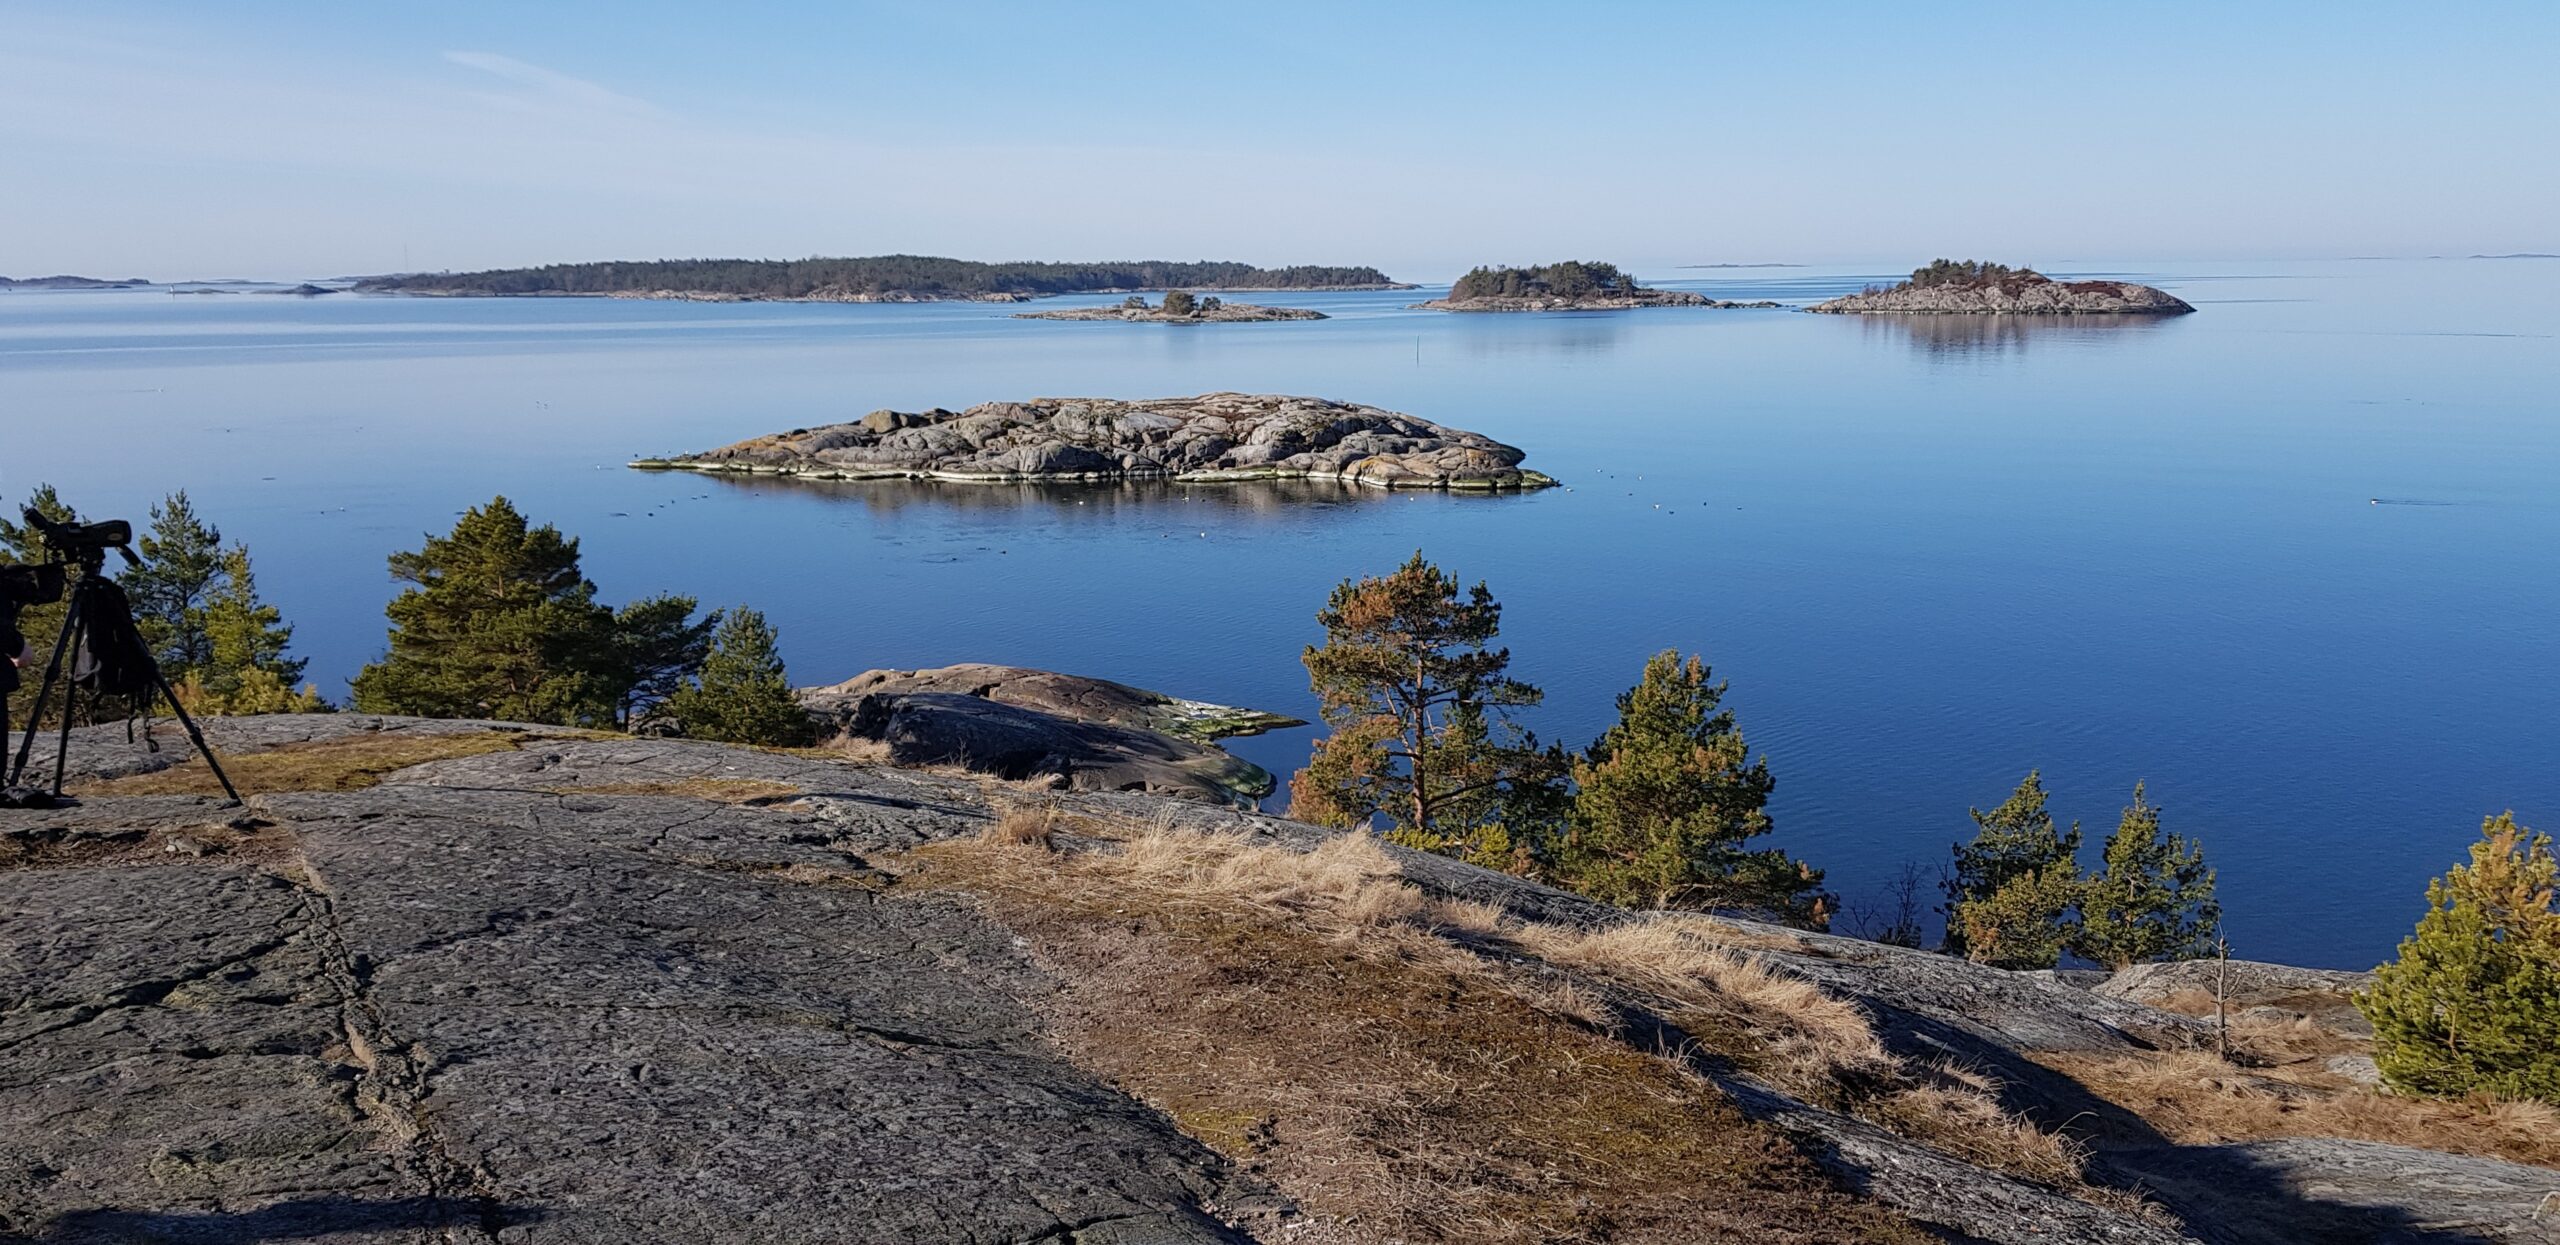 View to the Baltic Sea and its beautiful archipelago.